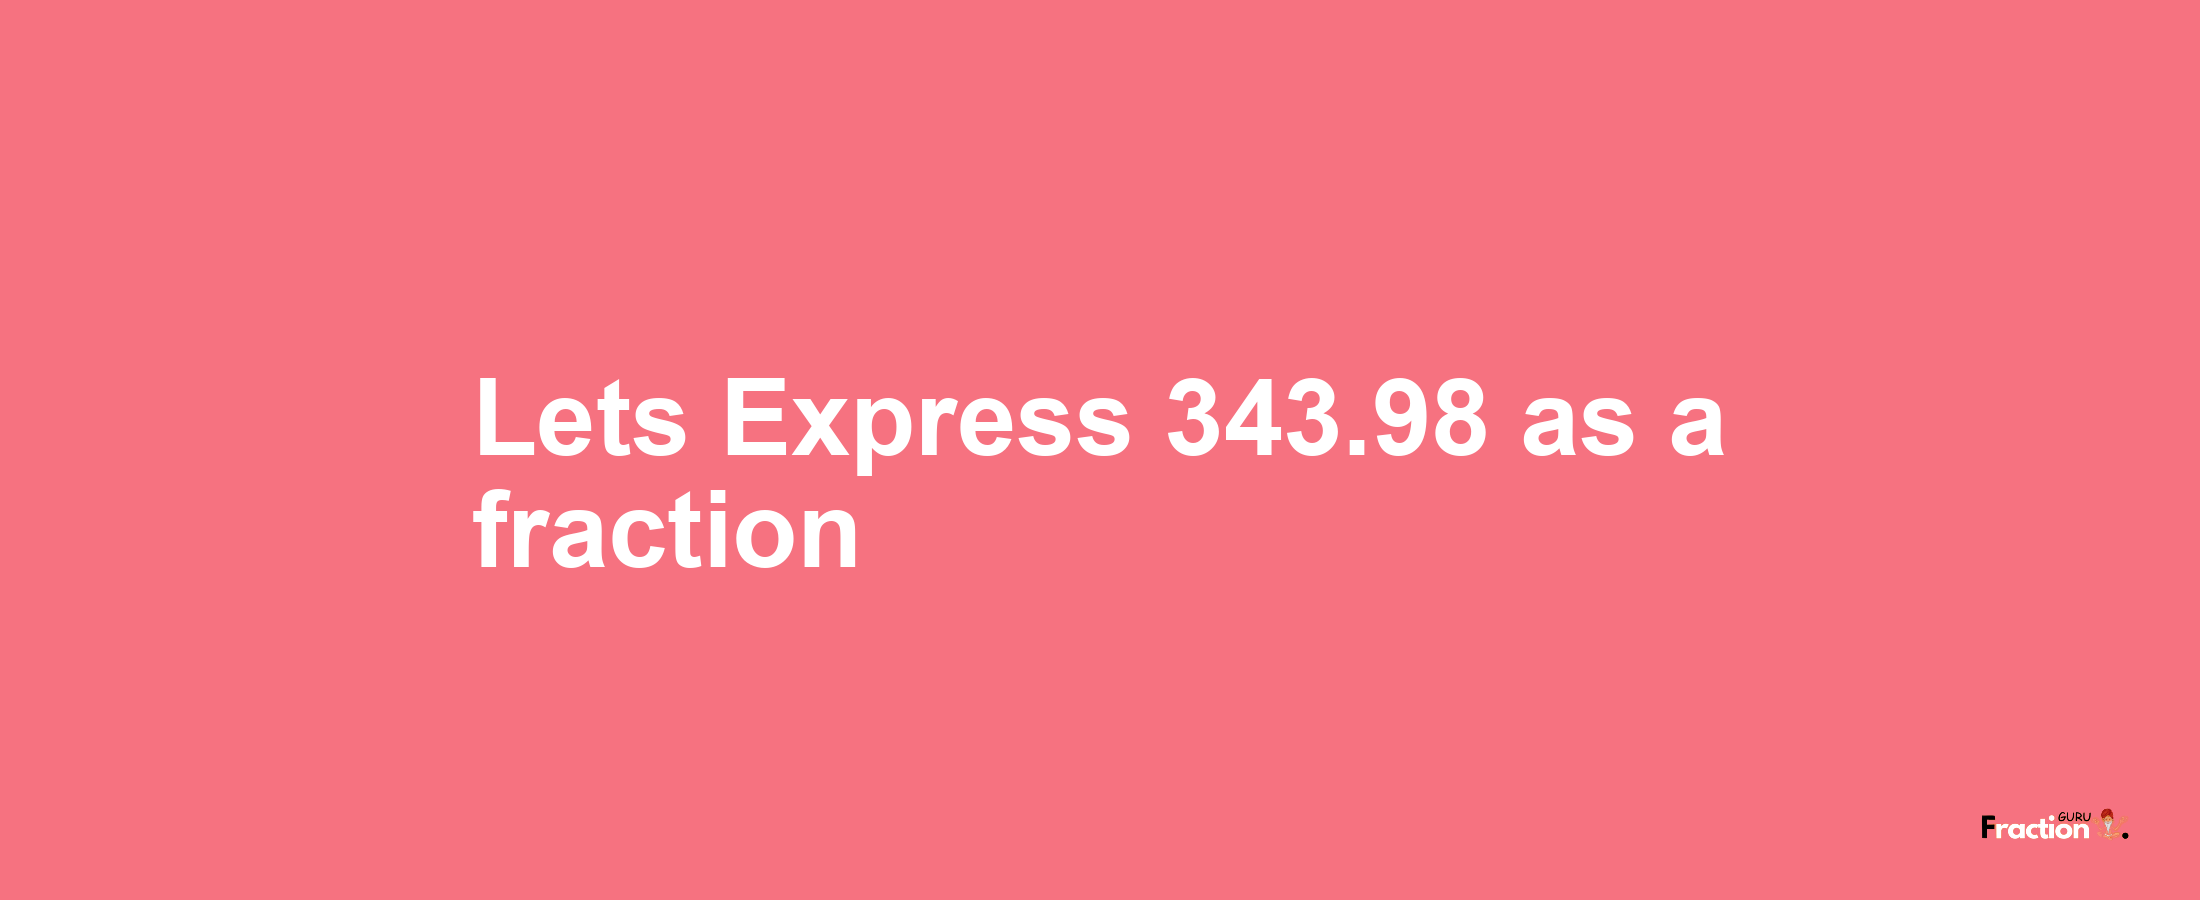 Lets Express 343.98 as afraction